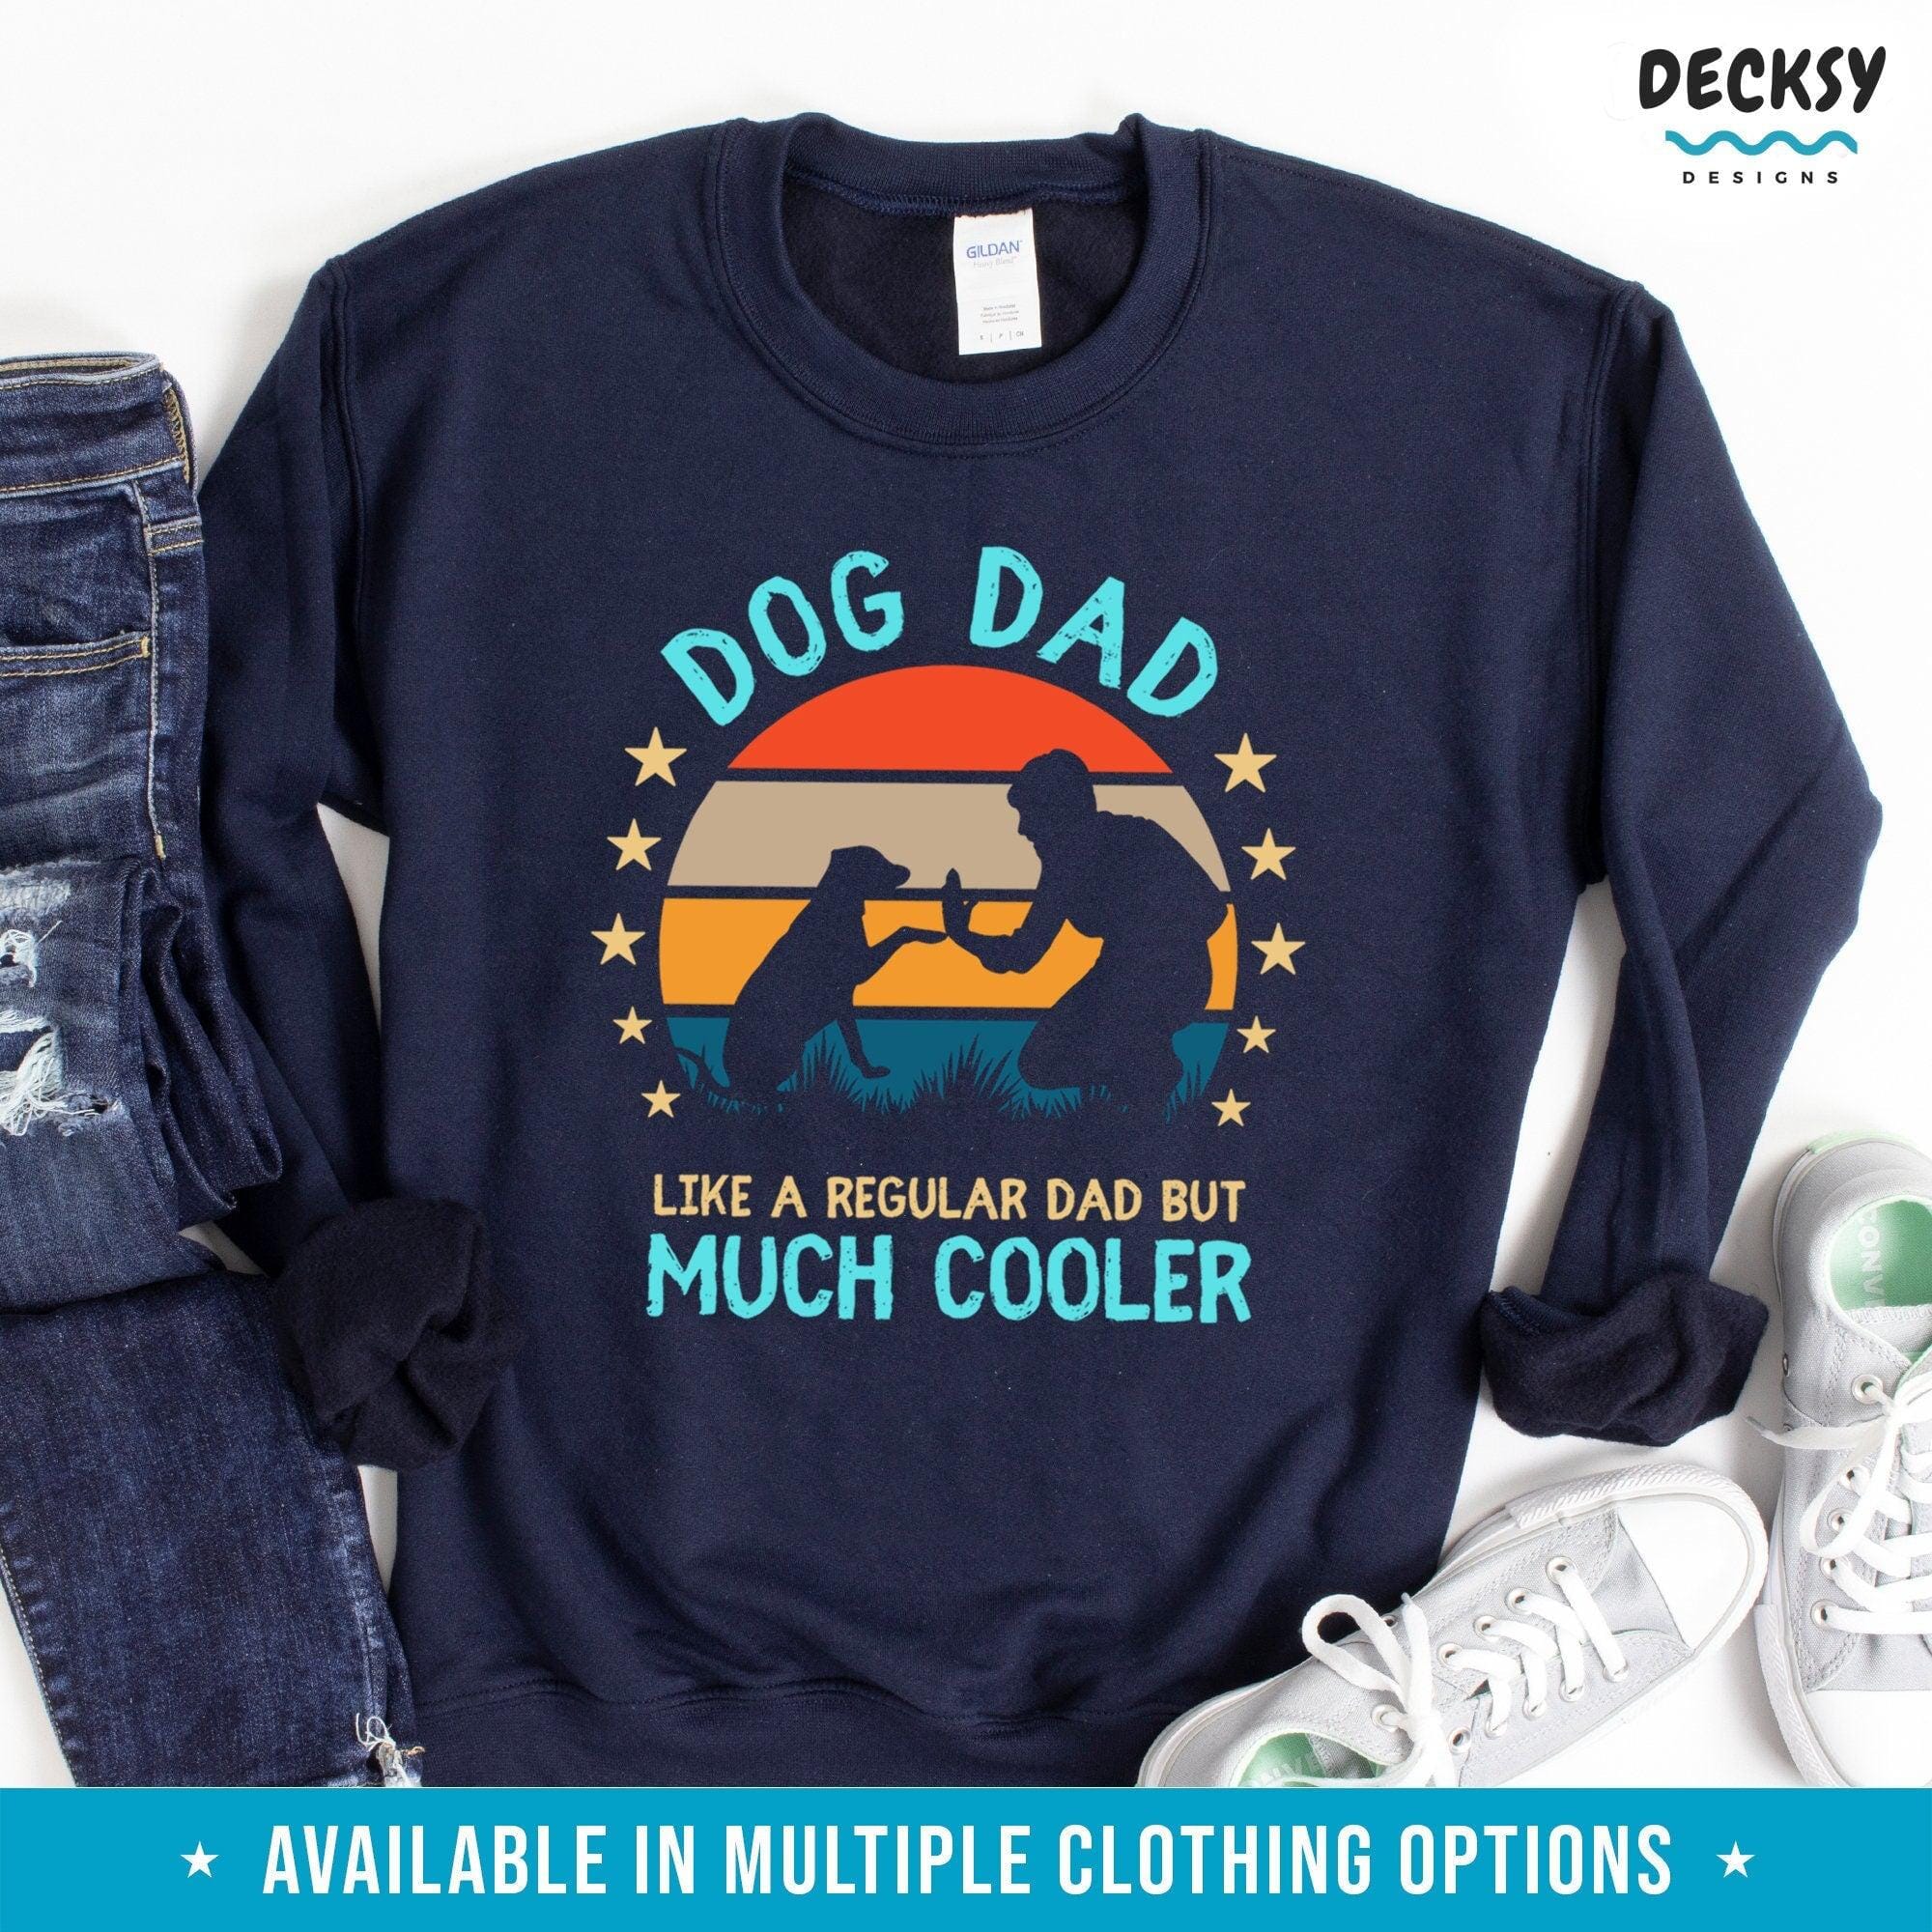 Dog Dad Shirt, Funny Dog Owner Gift-Clothing:Gender-Neutral Adult Clothing:Tops & Tees:T-shirts:Graphic Tees-DecksyDesigns